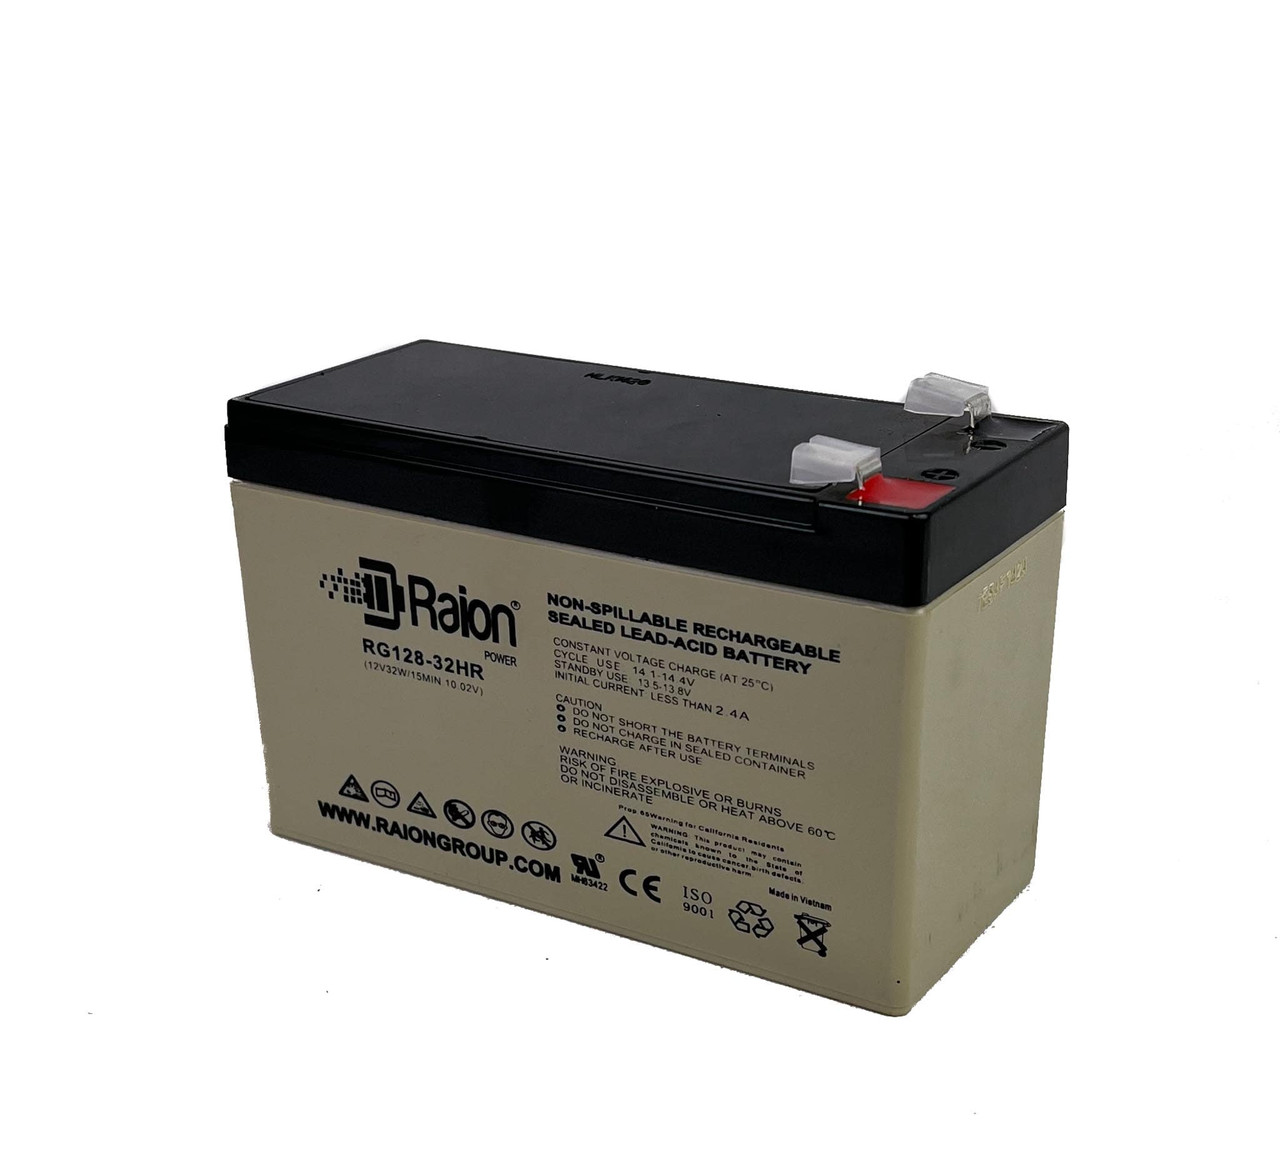 Raion Power RG128-32HR 12V 7.5Ah Replacement UPS Battery Cartridge for ONEAC ONe200A-SB (Single Battery Model)